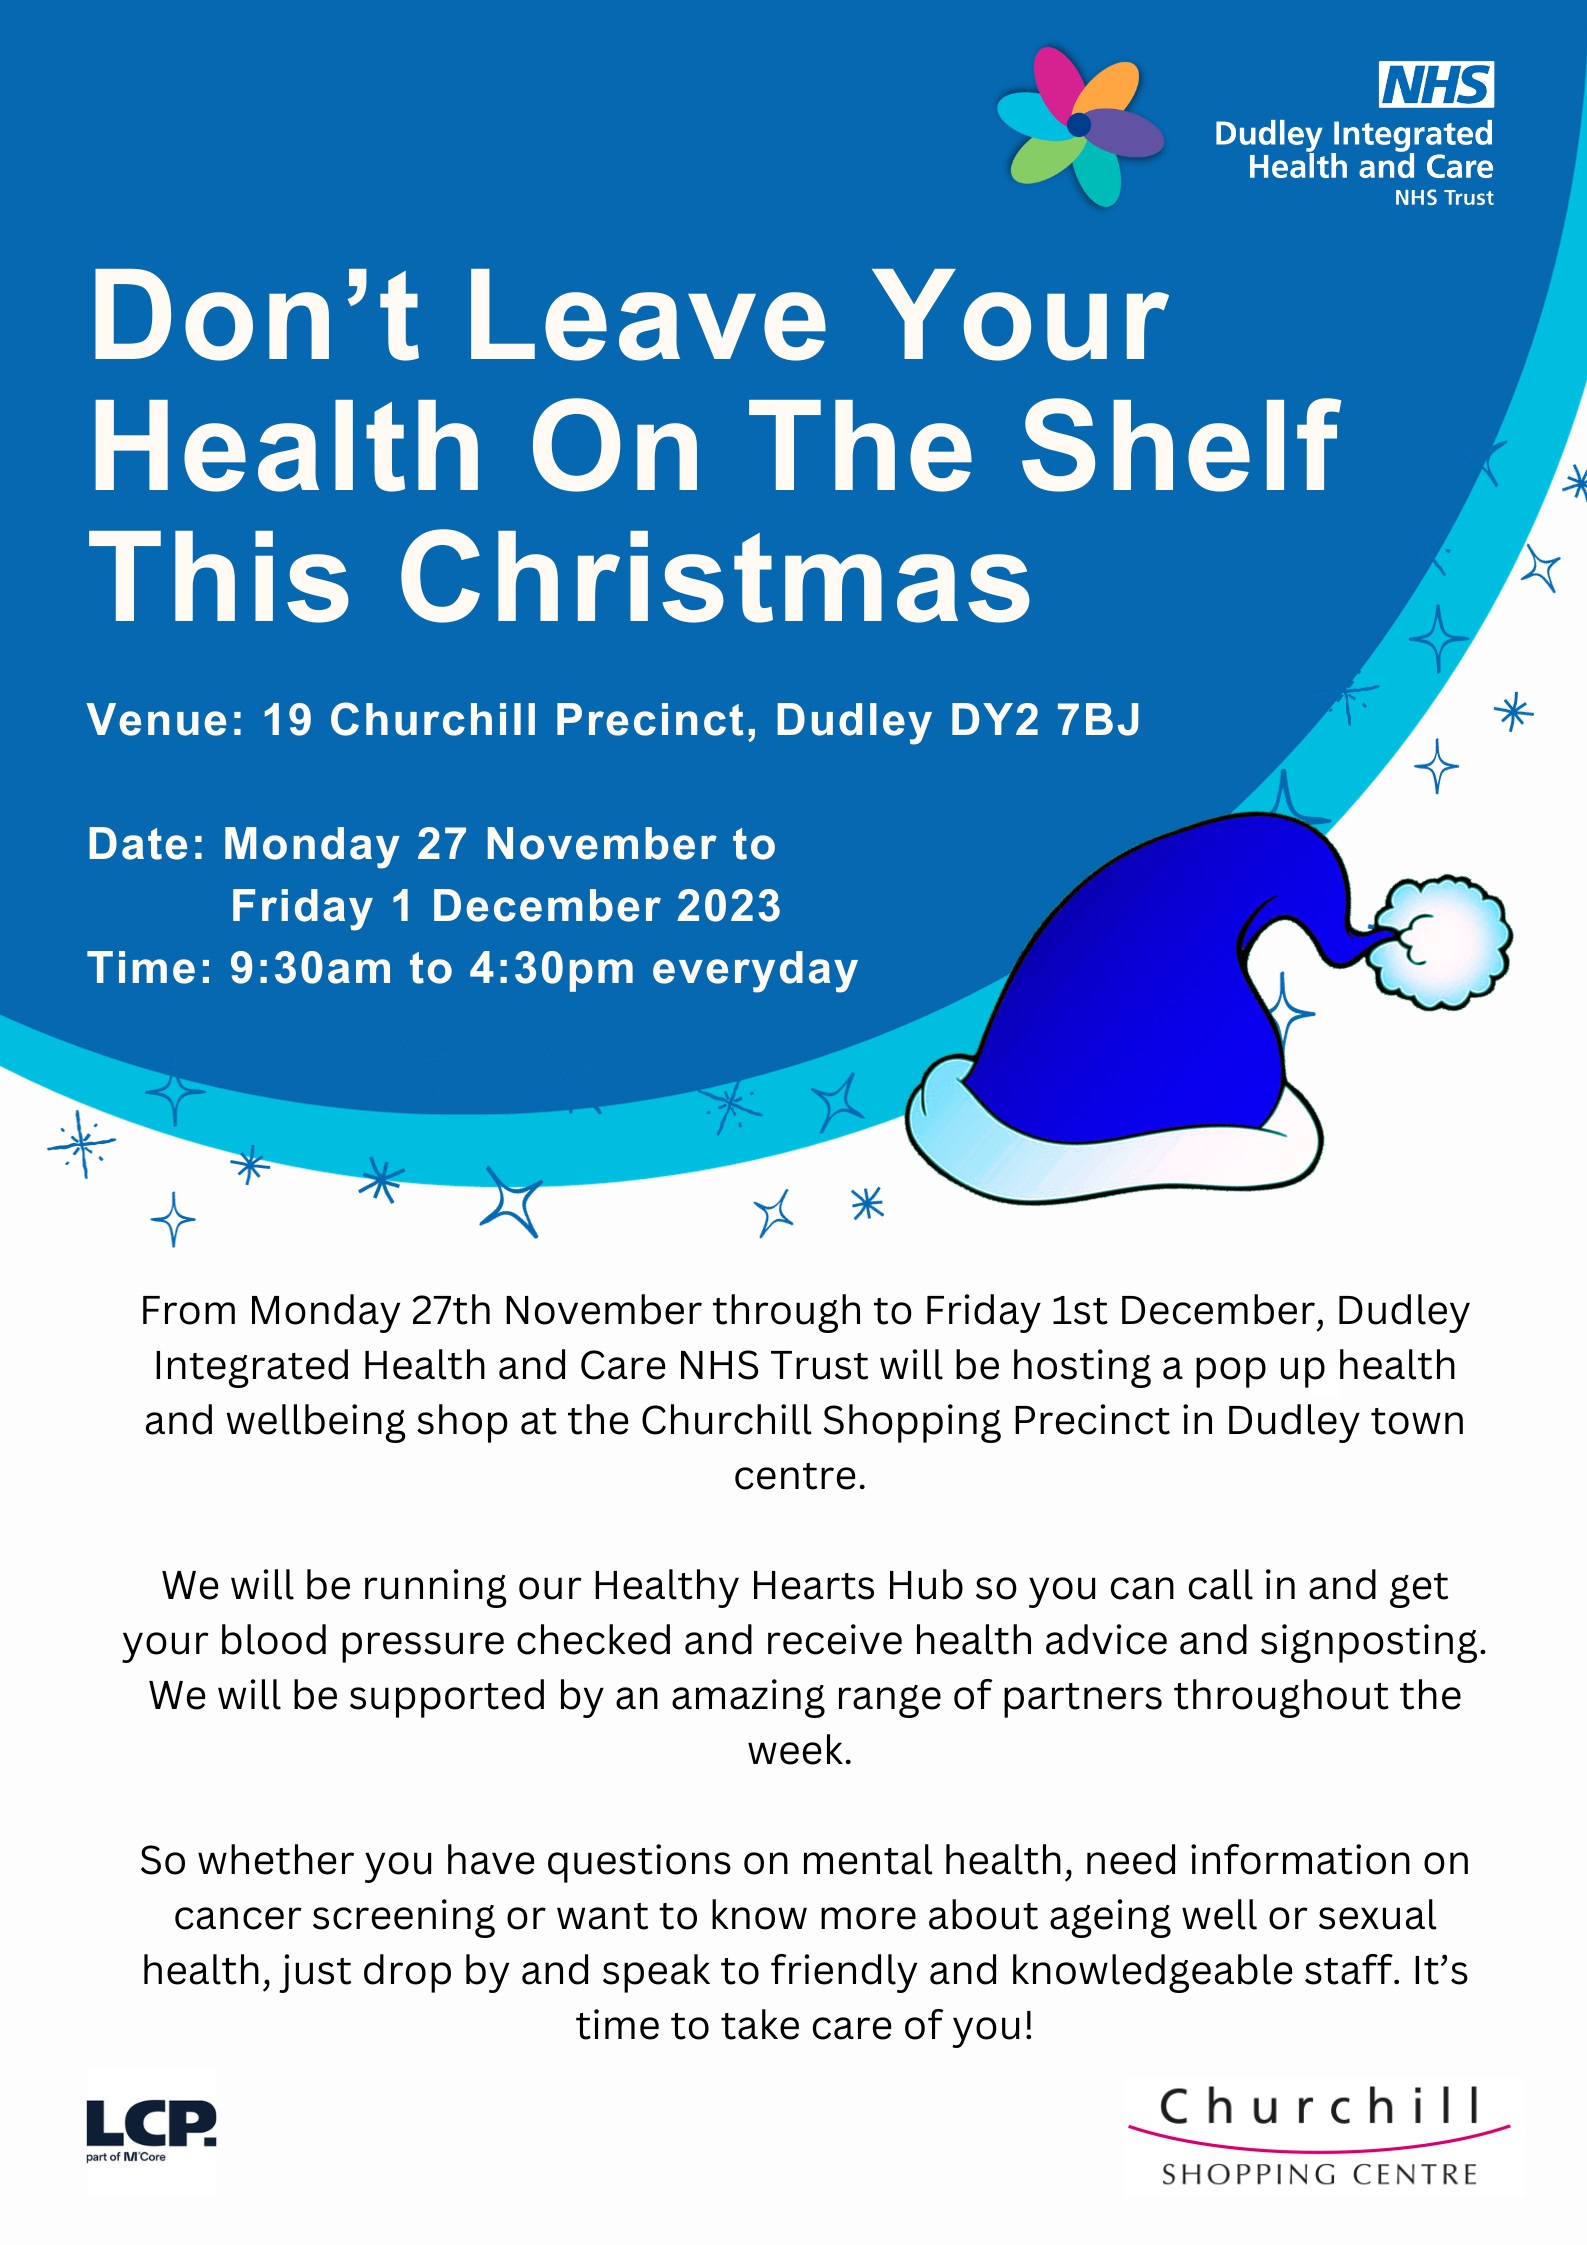 Health on the shelf poster